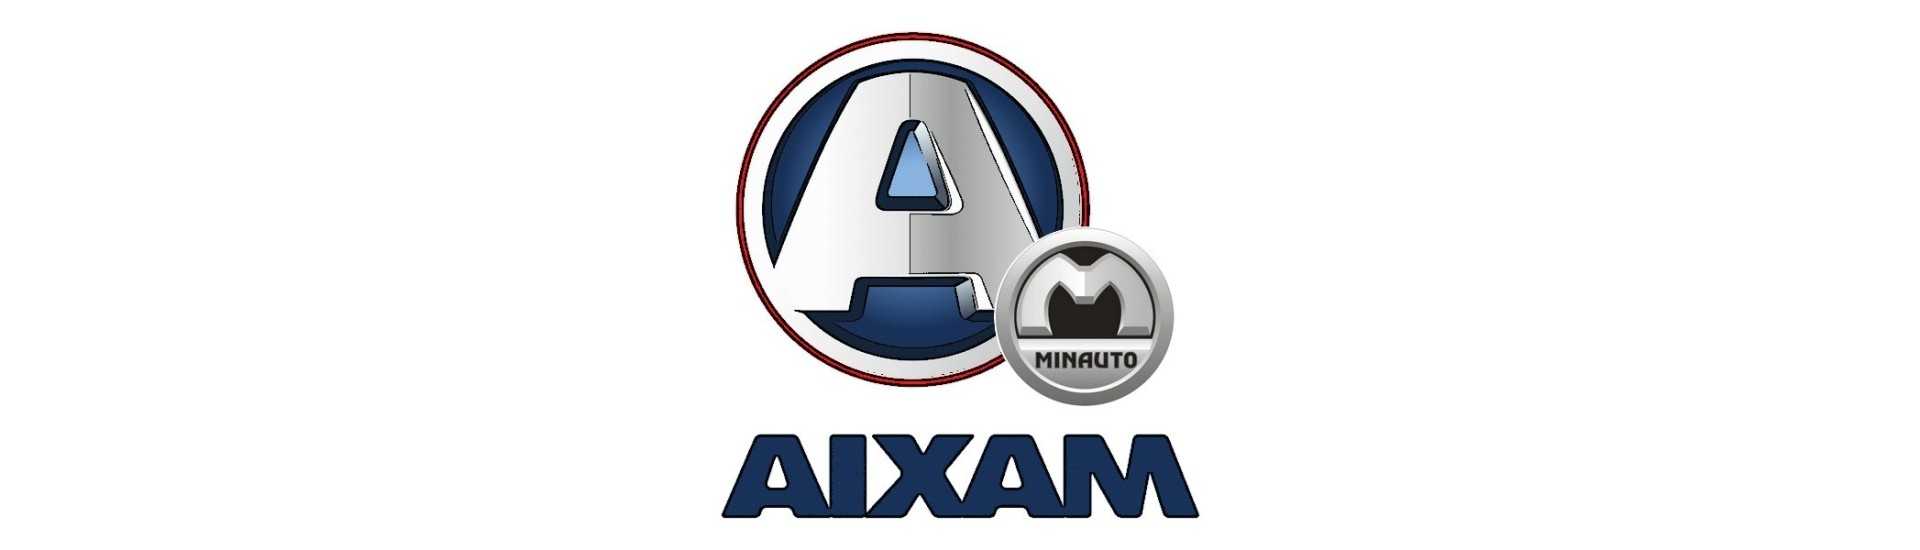 Flight at the best price for car without a permit Aixam Minauto